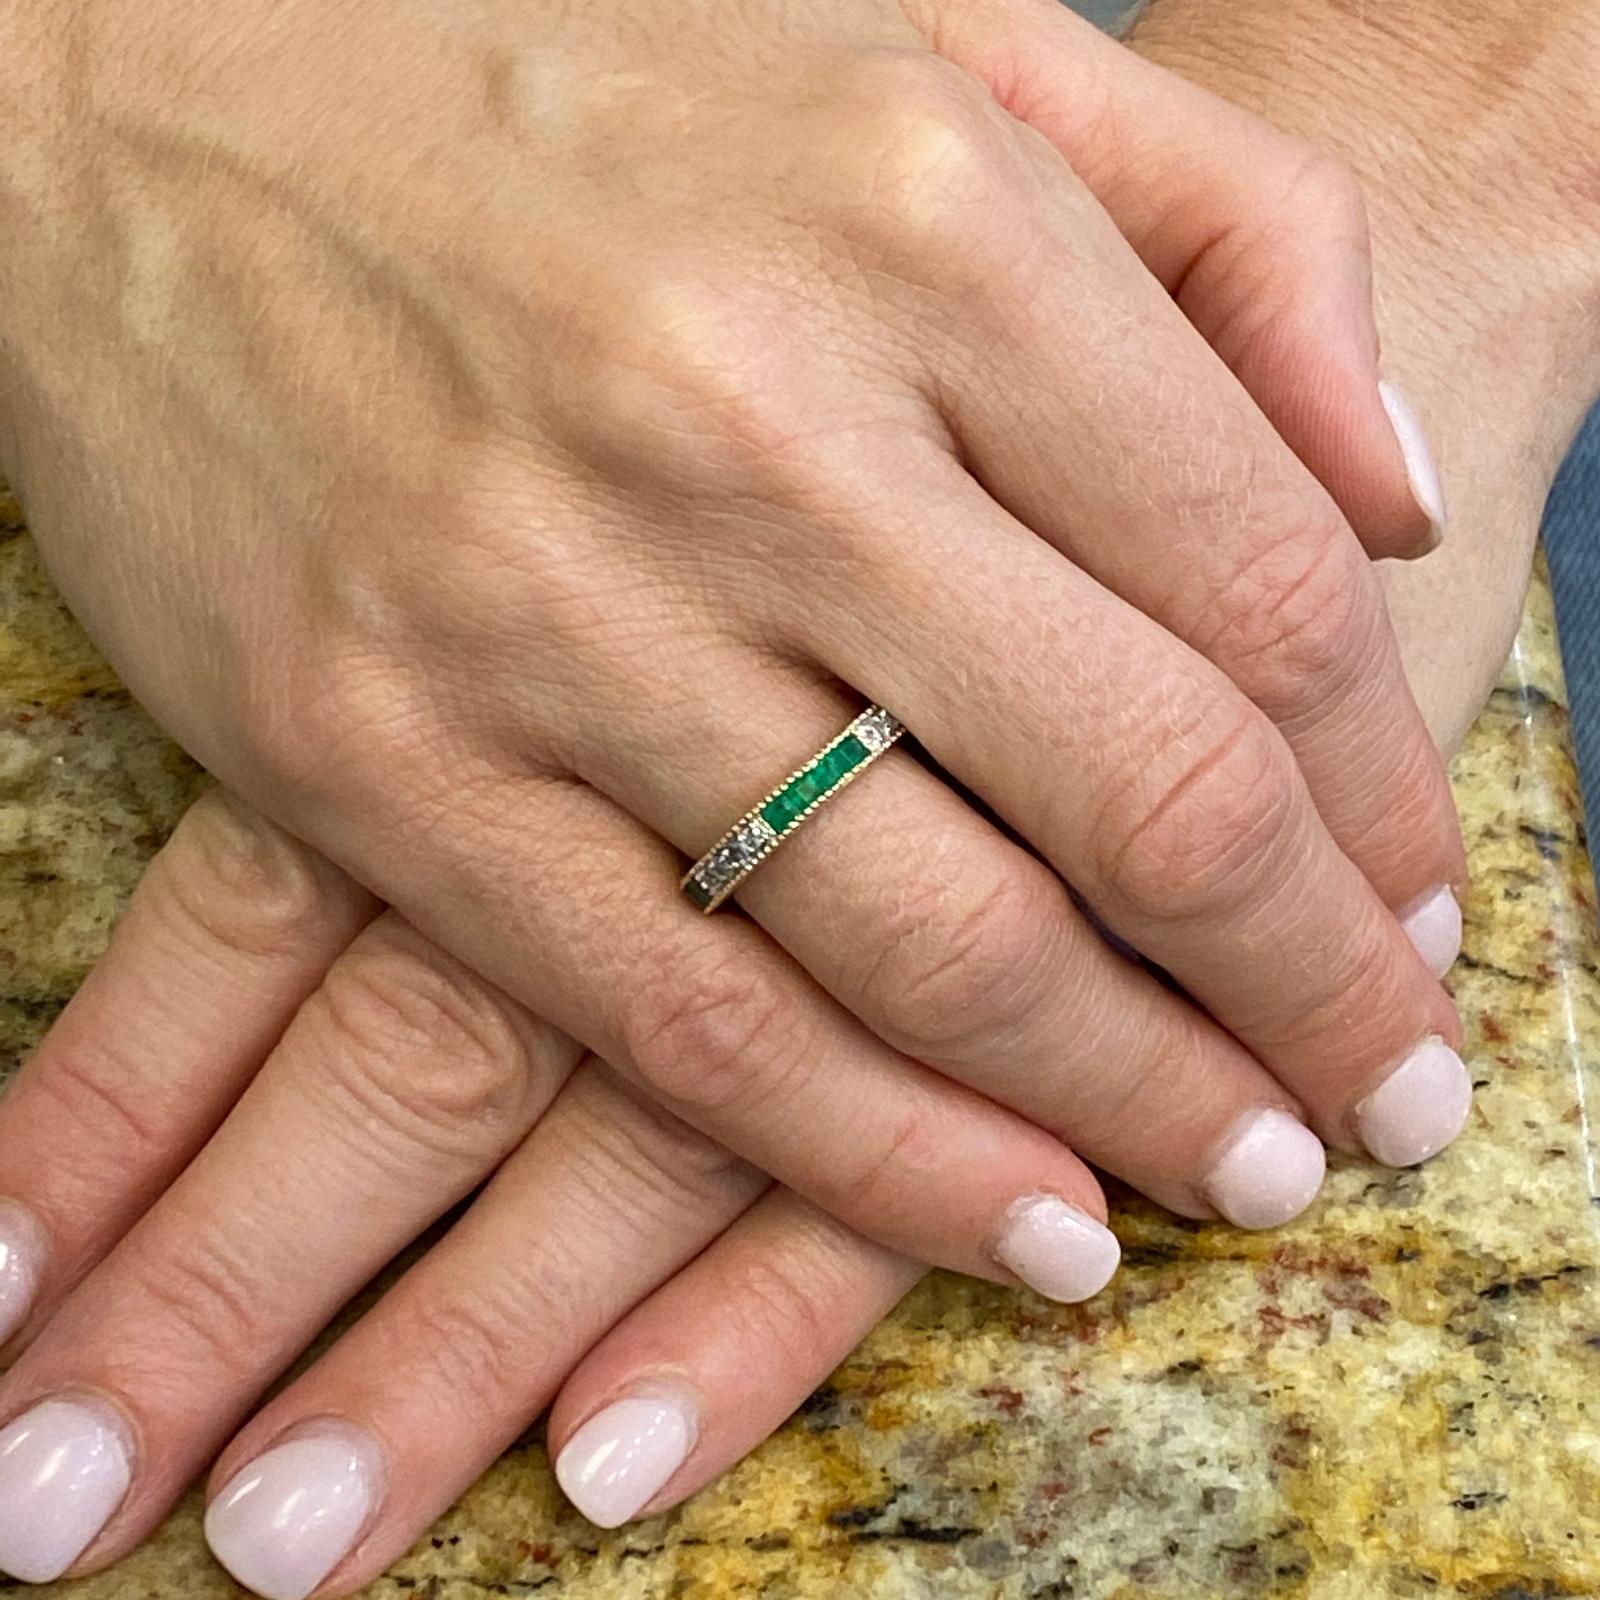 Diamond and emerald eternity band ring fashioned in 14 karat yellow gold. The band features 7 round brilliant cut diamonds weighing .21 carat total weight and 8 square cut natural emeralds weighing .64 carat total weight. The diamonds are graded G-H